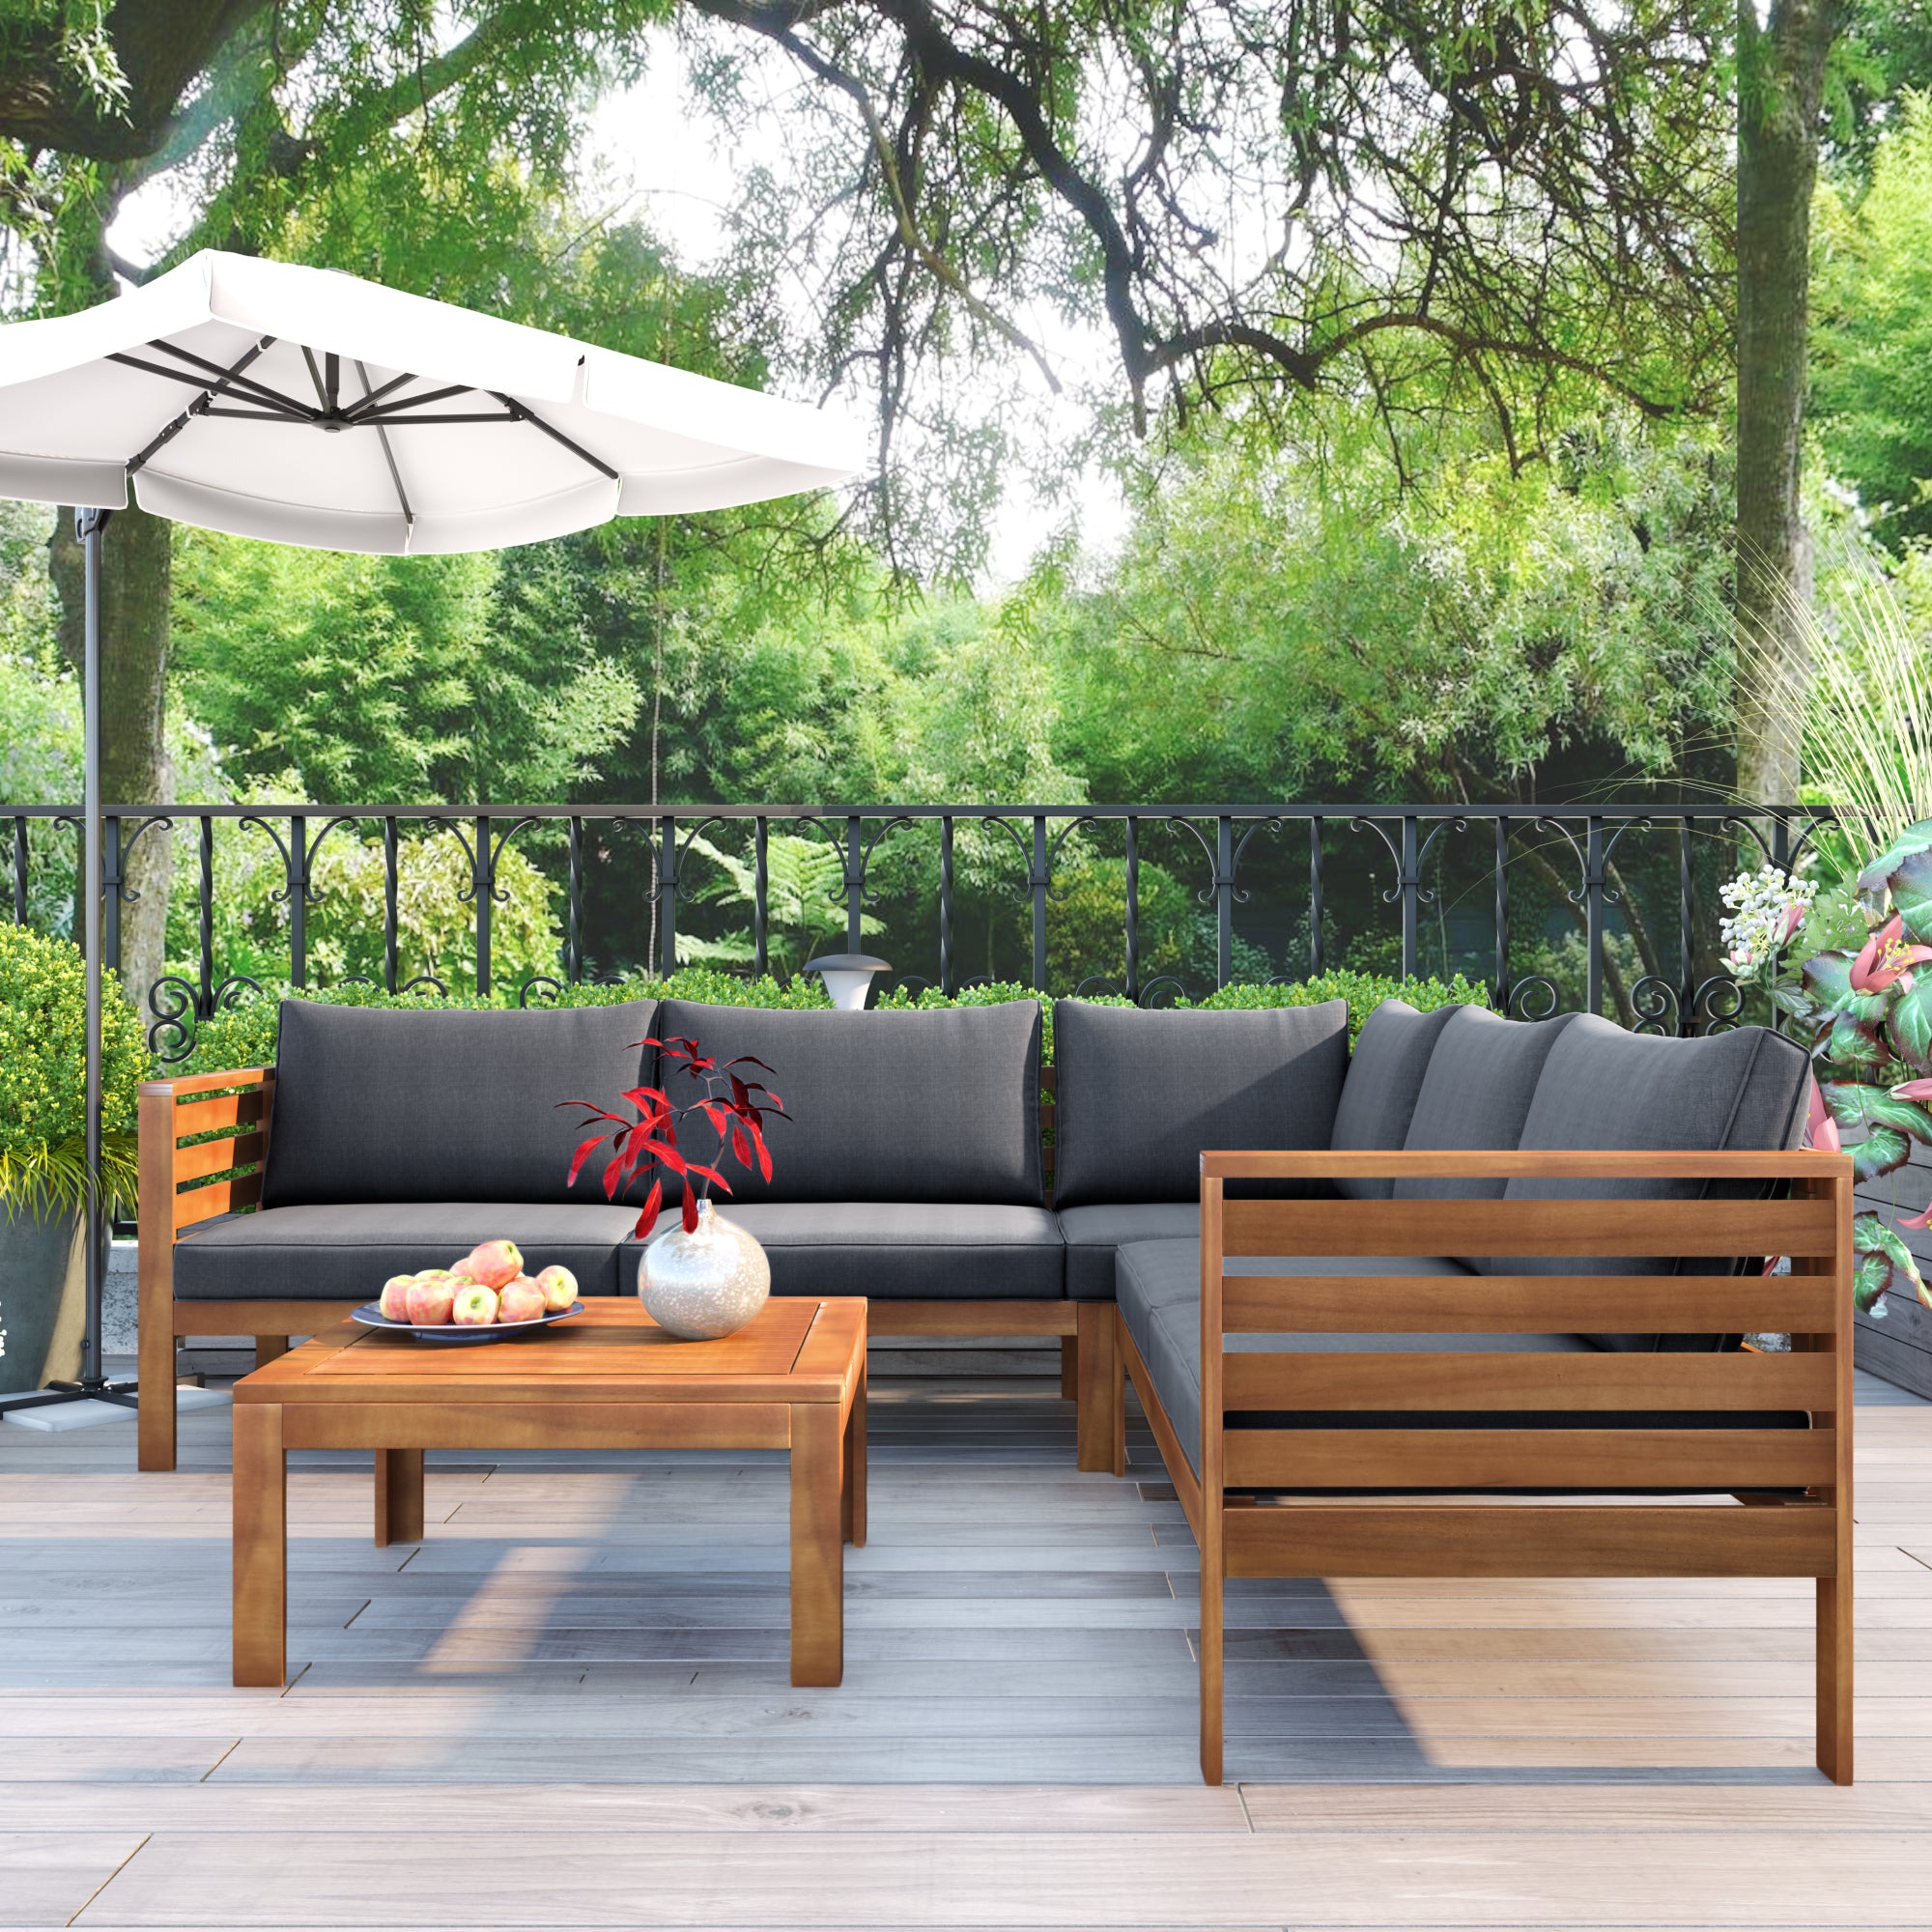 Outdoor Wood Sofa Set with Gray Cushions, Water-Resistant & UV Protected Texture, Coffee Table